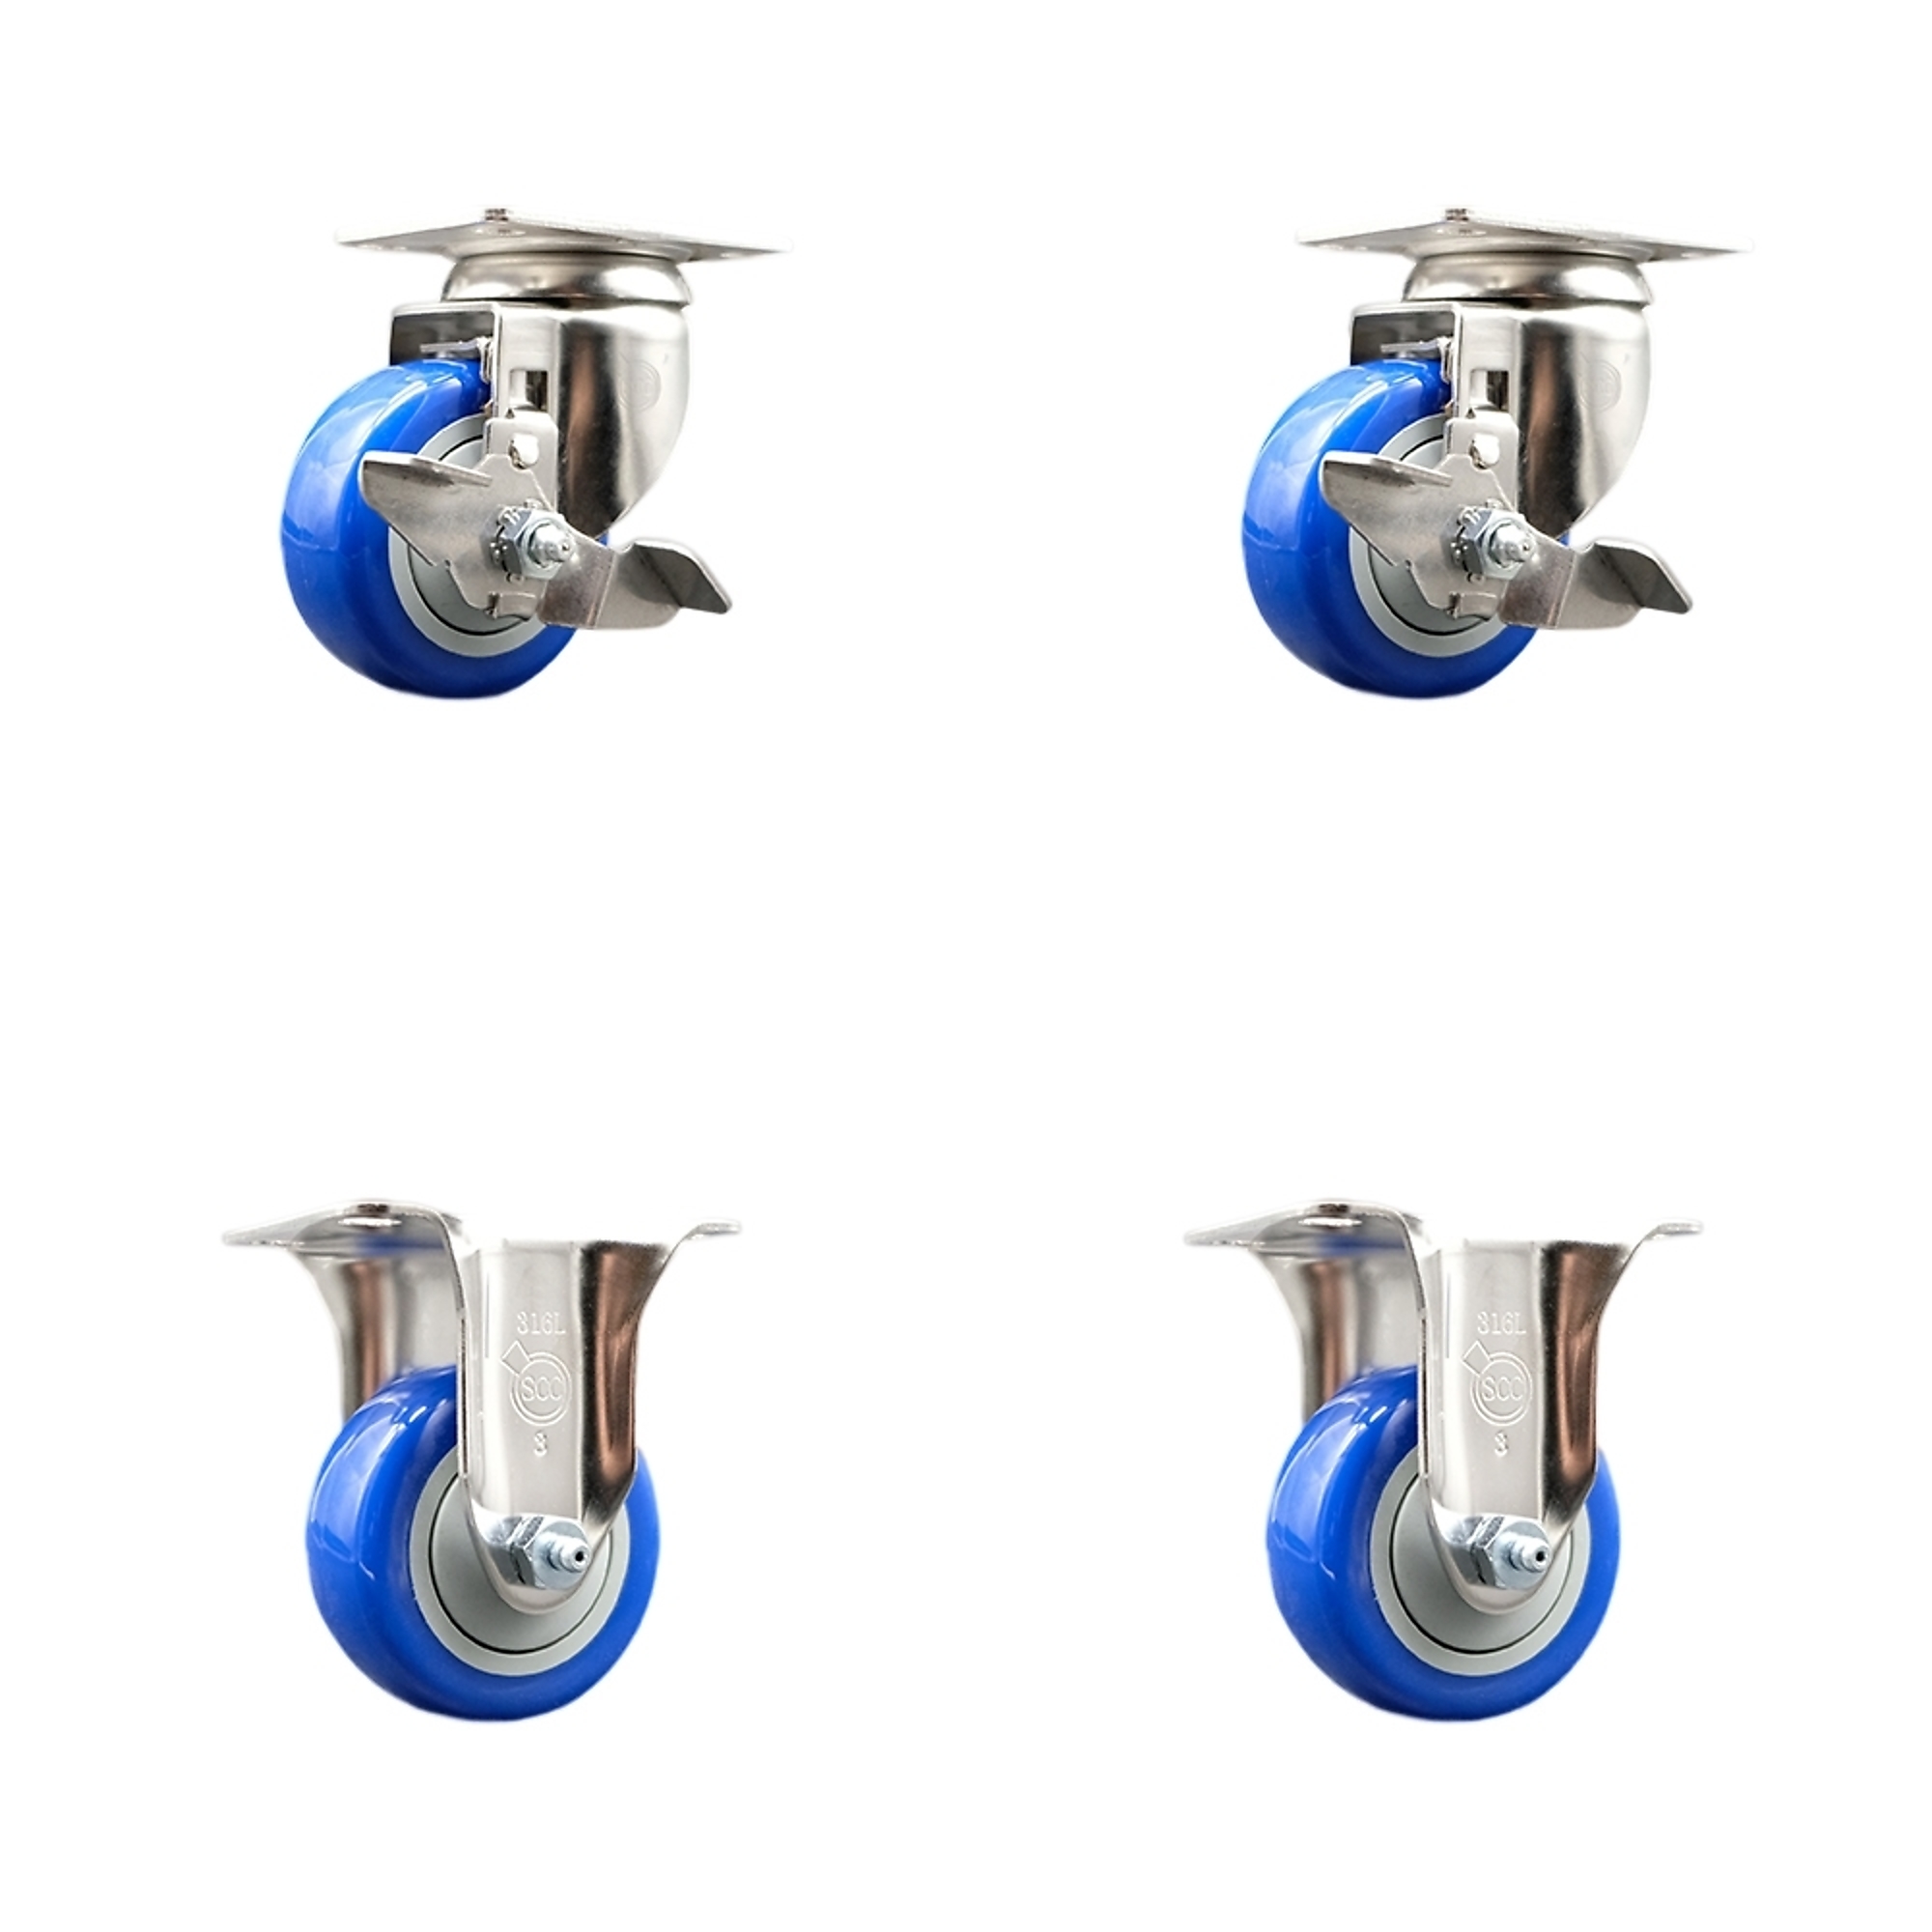 Service Caster, 3 1/2Inch x 1 1/4Inch Plate Casters, Wheel Diameter 3.5 in, Caster Type Swivel, Package (qty.) 4, Model SCC-SS31620S3514-PPUB-BLUE-TLB